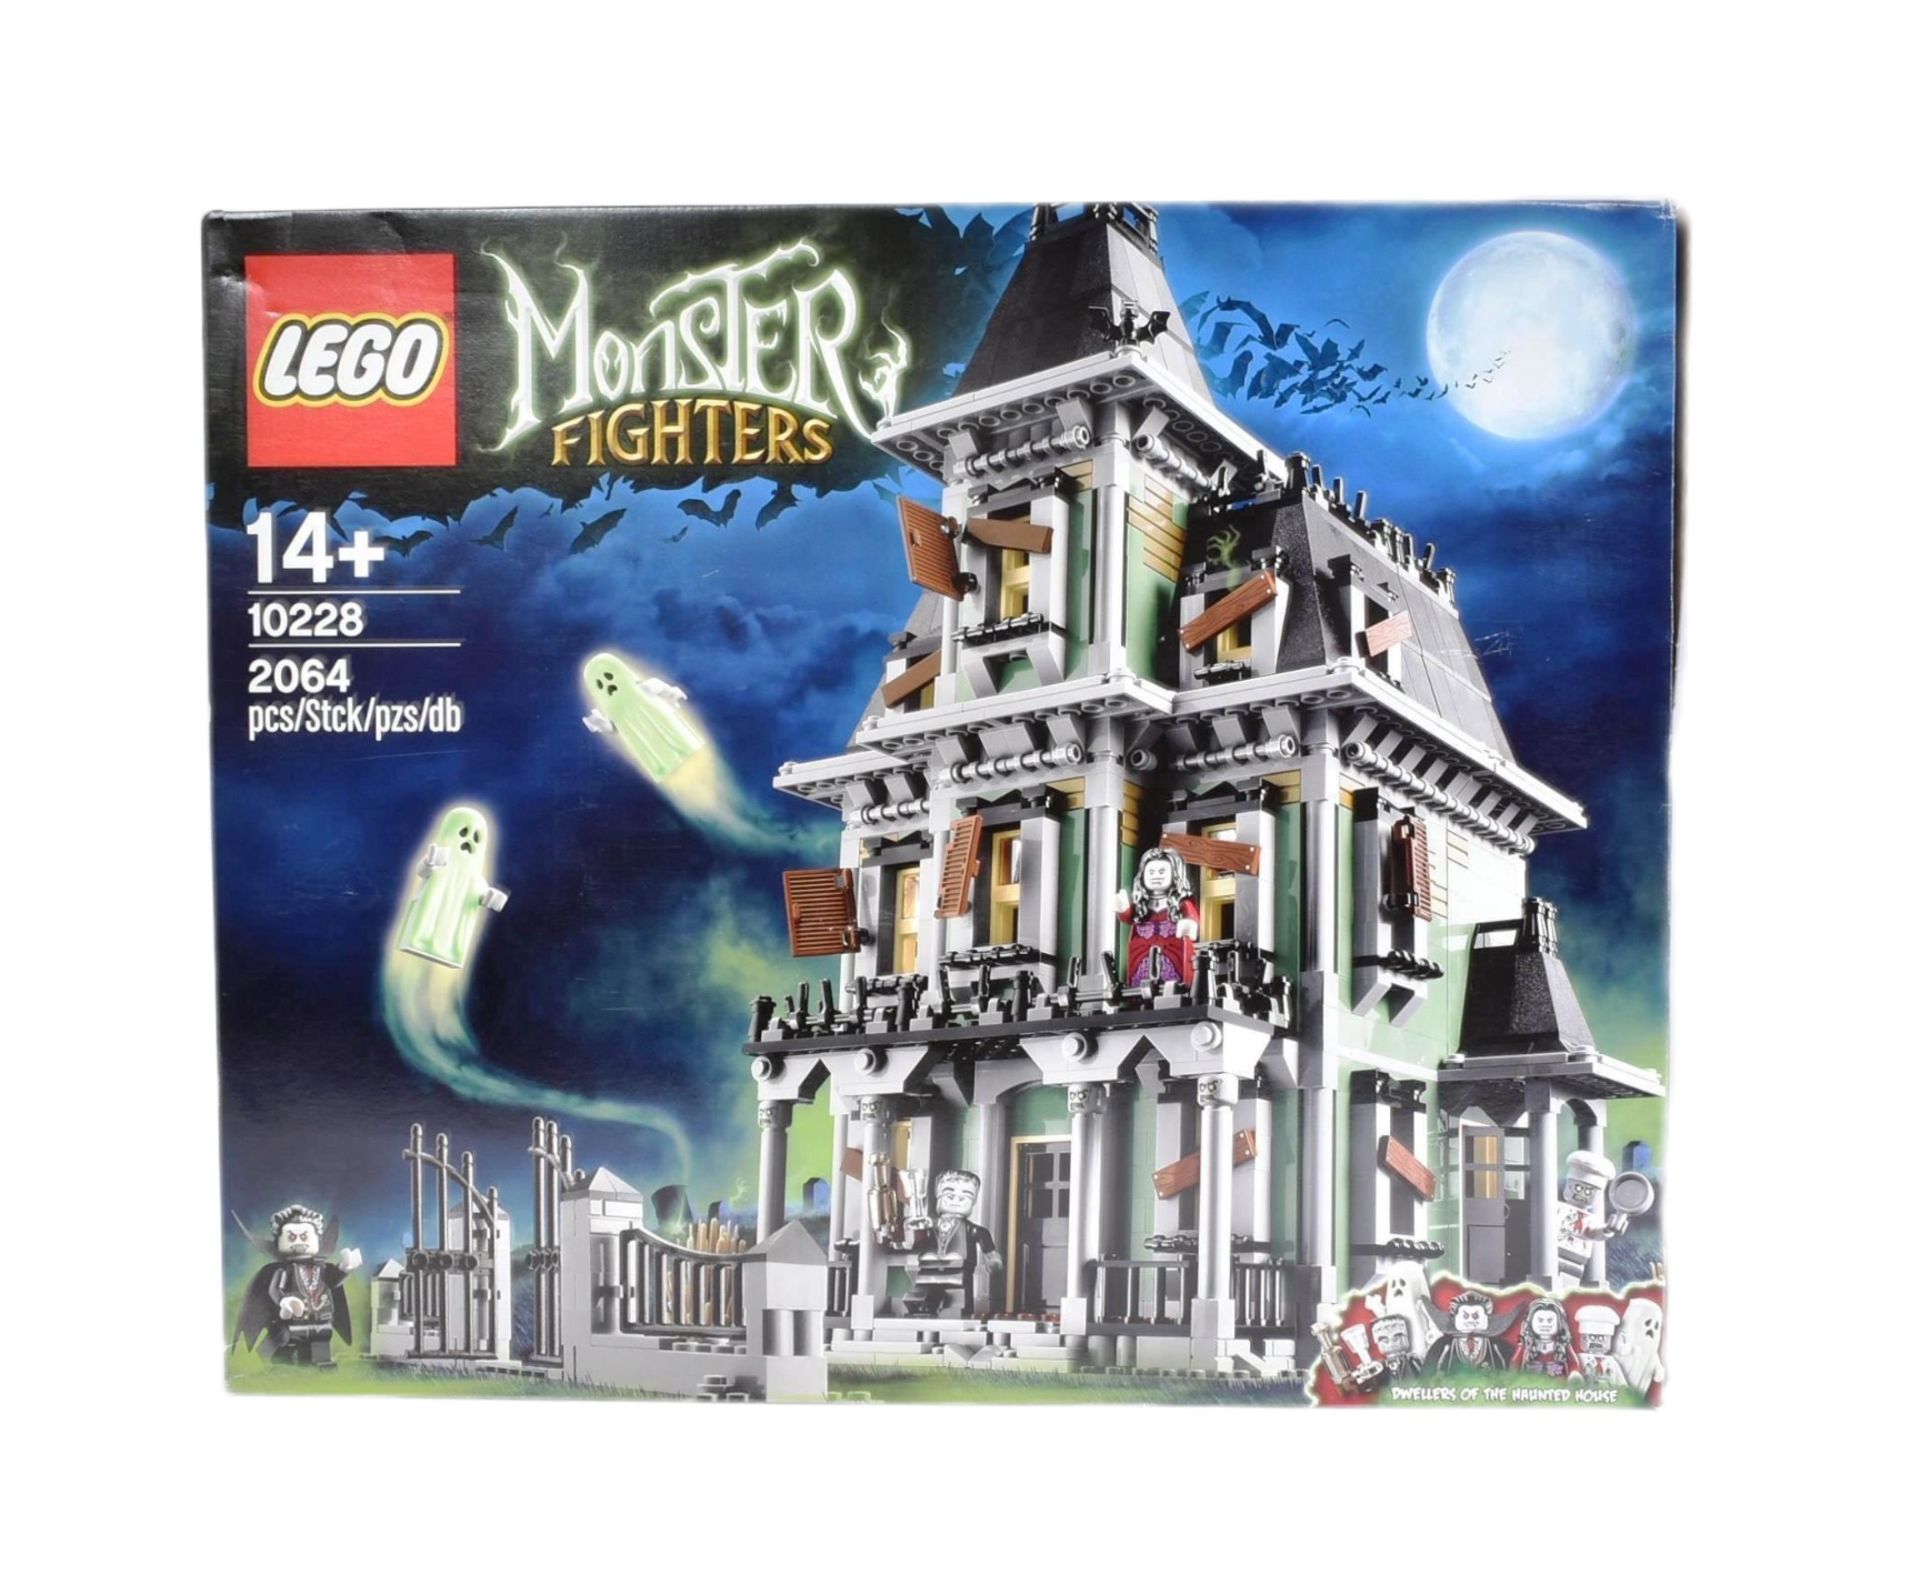 LEGO - MONSTER FIGHTERS - 10228 - THE HAUNTED HOUSE - Image 6 of 6